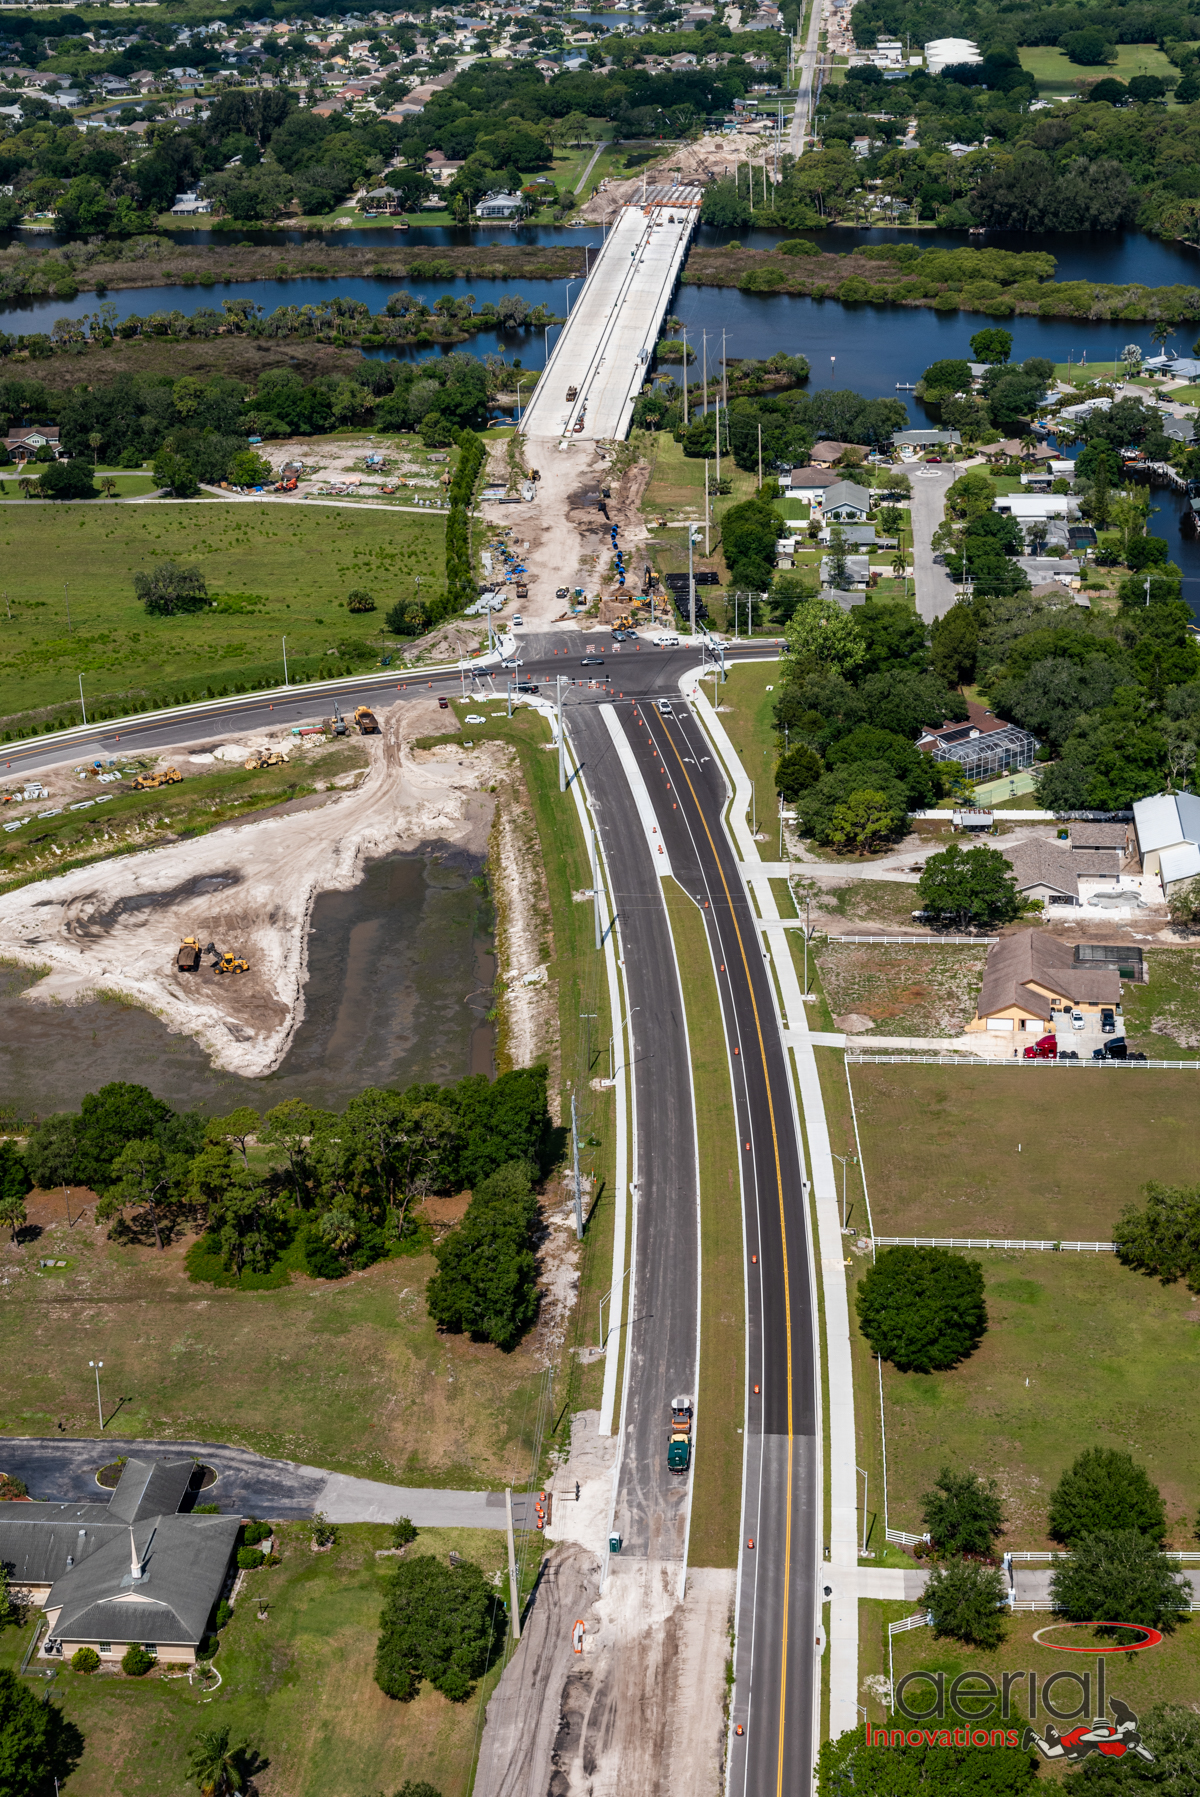 44th Avenue East between Caruso Road and the Braden River